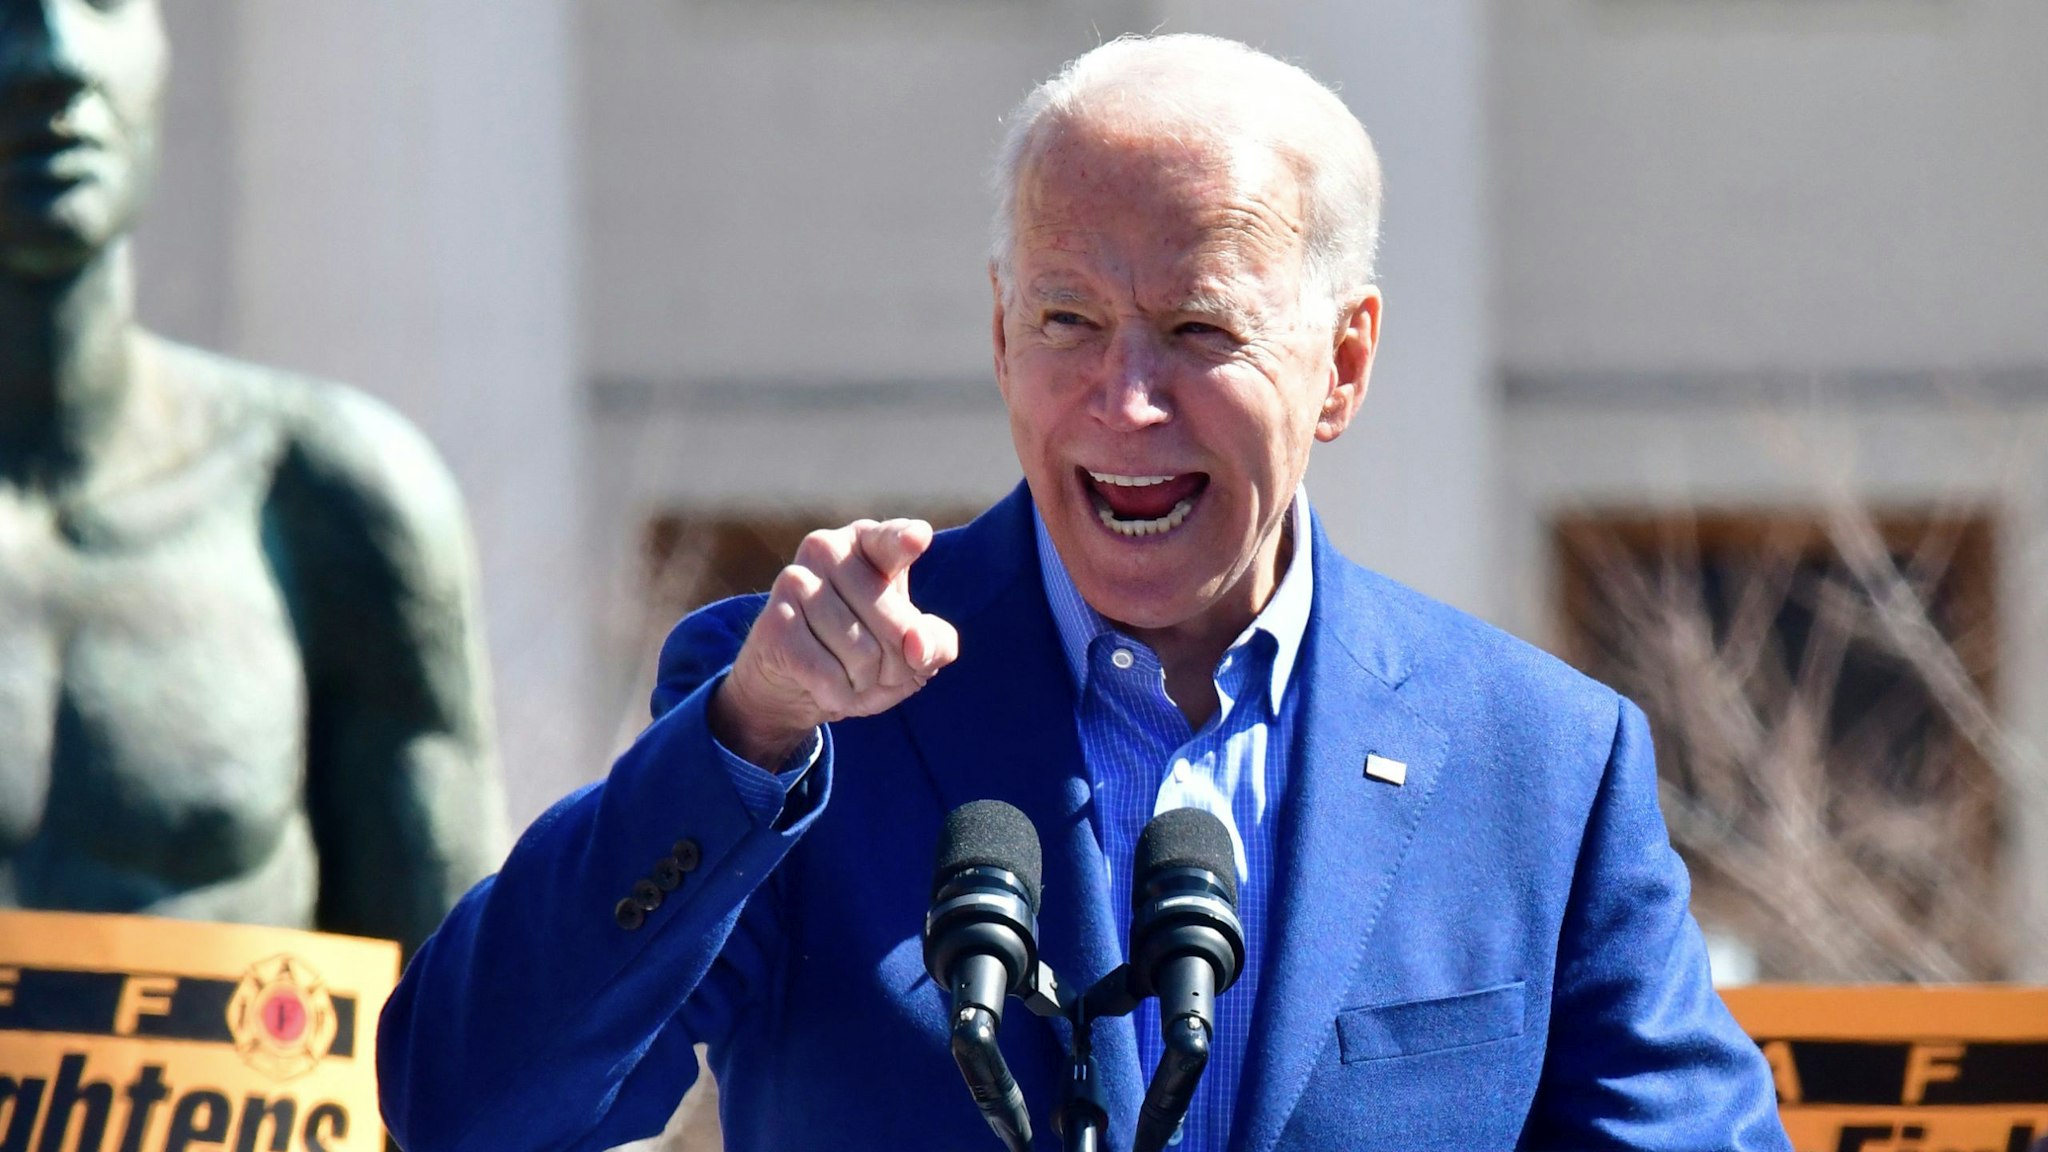 Democratic presidential candidate Joe Biden speaks during a campaign rally at Kiener Plaza Park in St. Louis, Missouri on March 7, 2020.